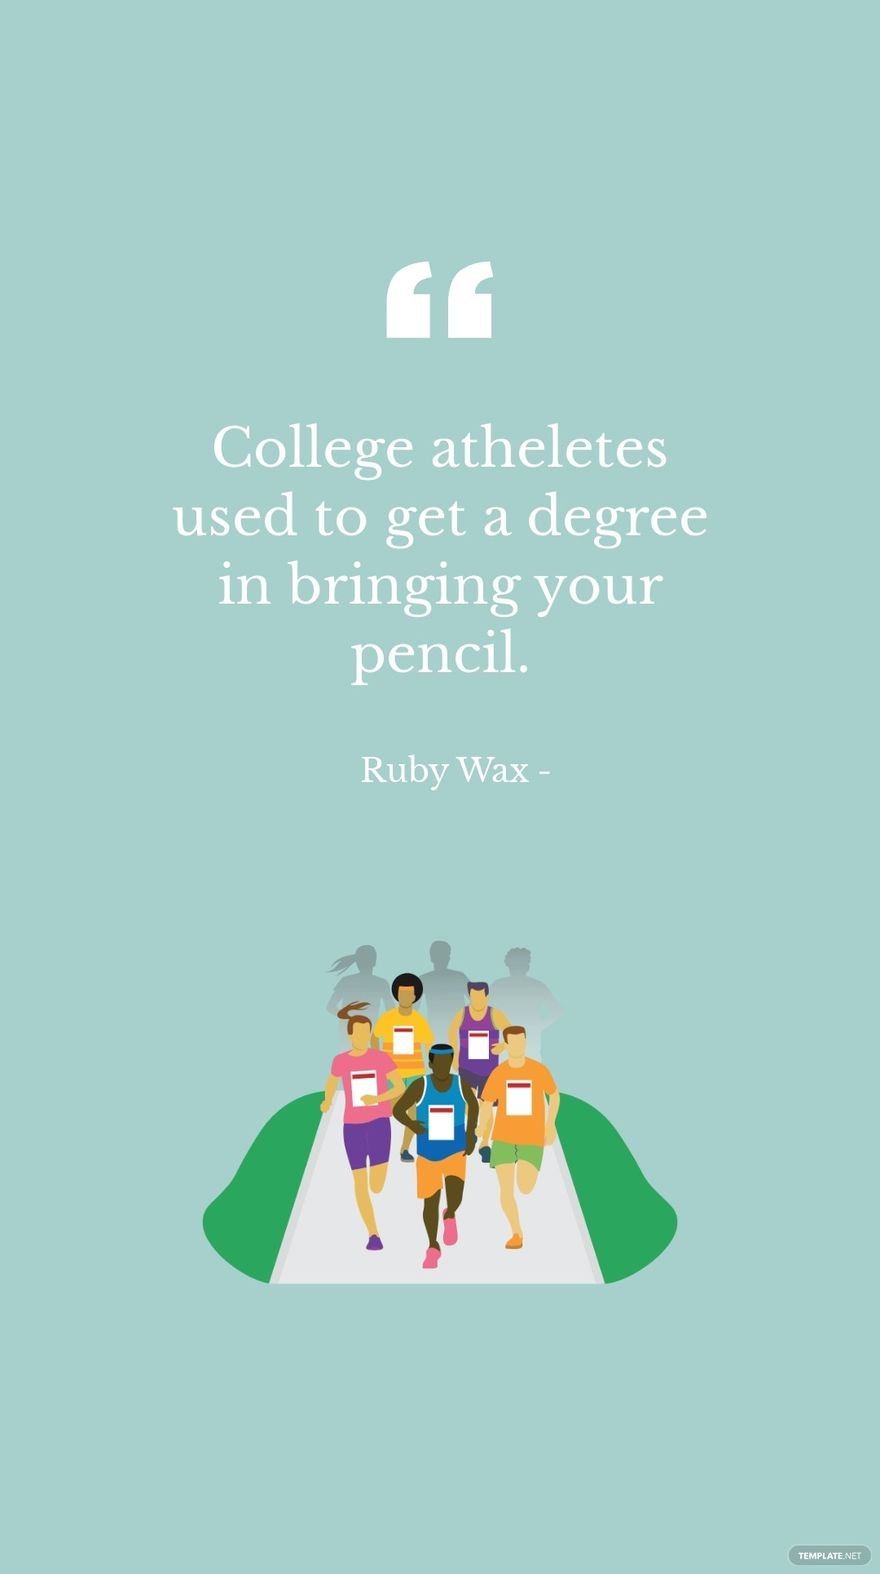 Free Ruby Wax - College atheletes used to get a degree in bringing your pencil.